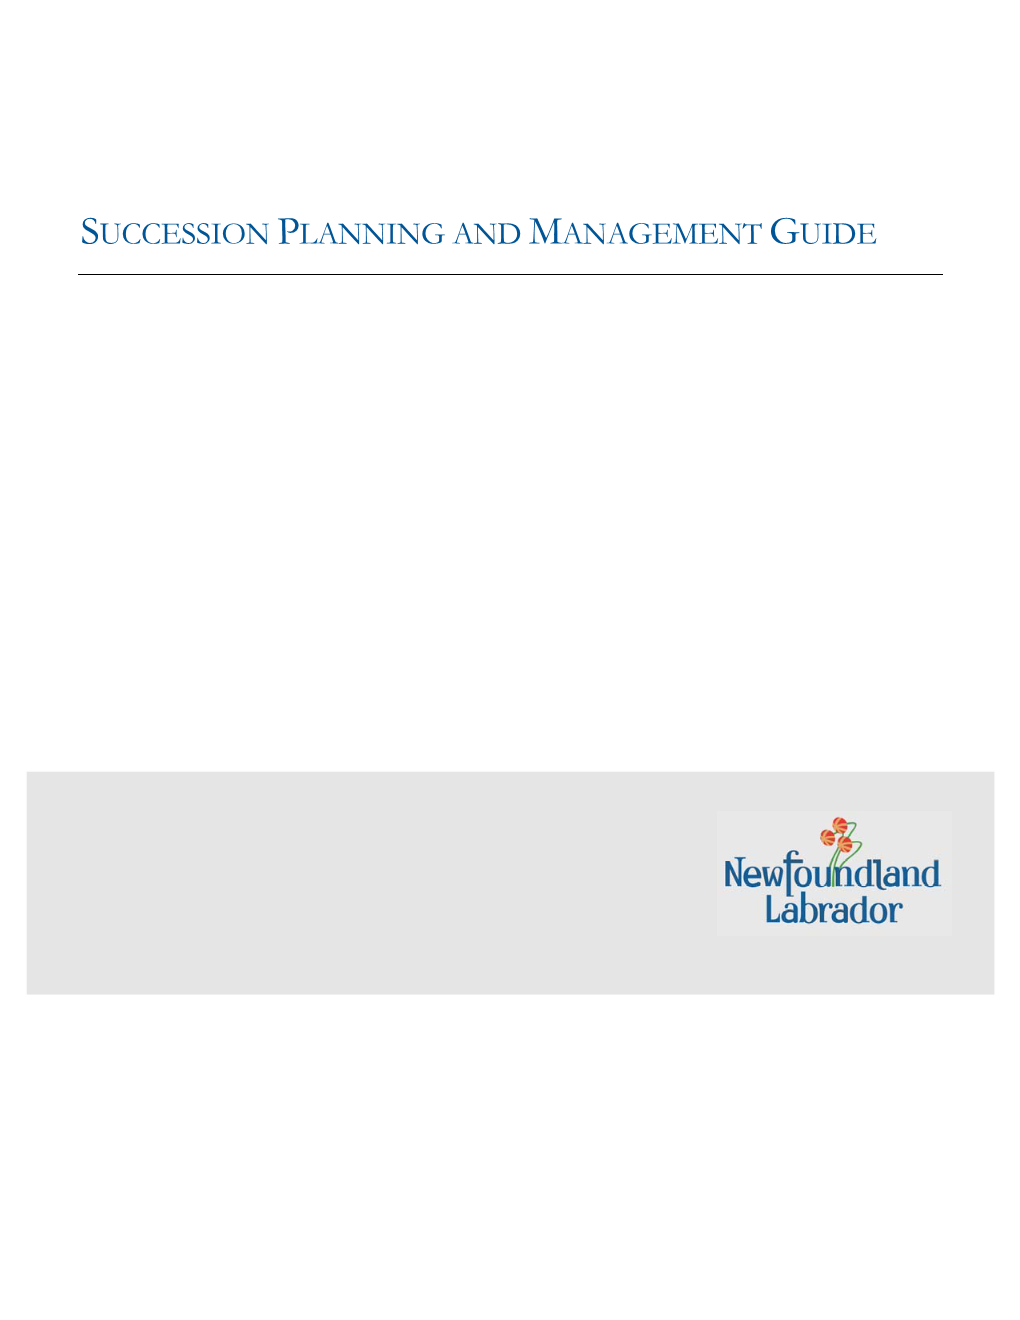 Succession Planning and Management Guide